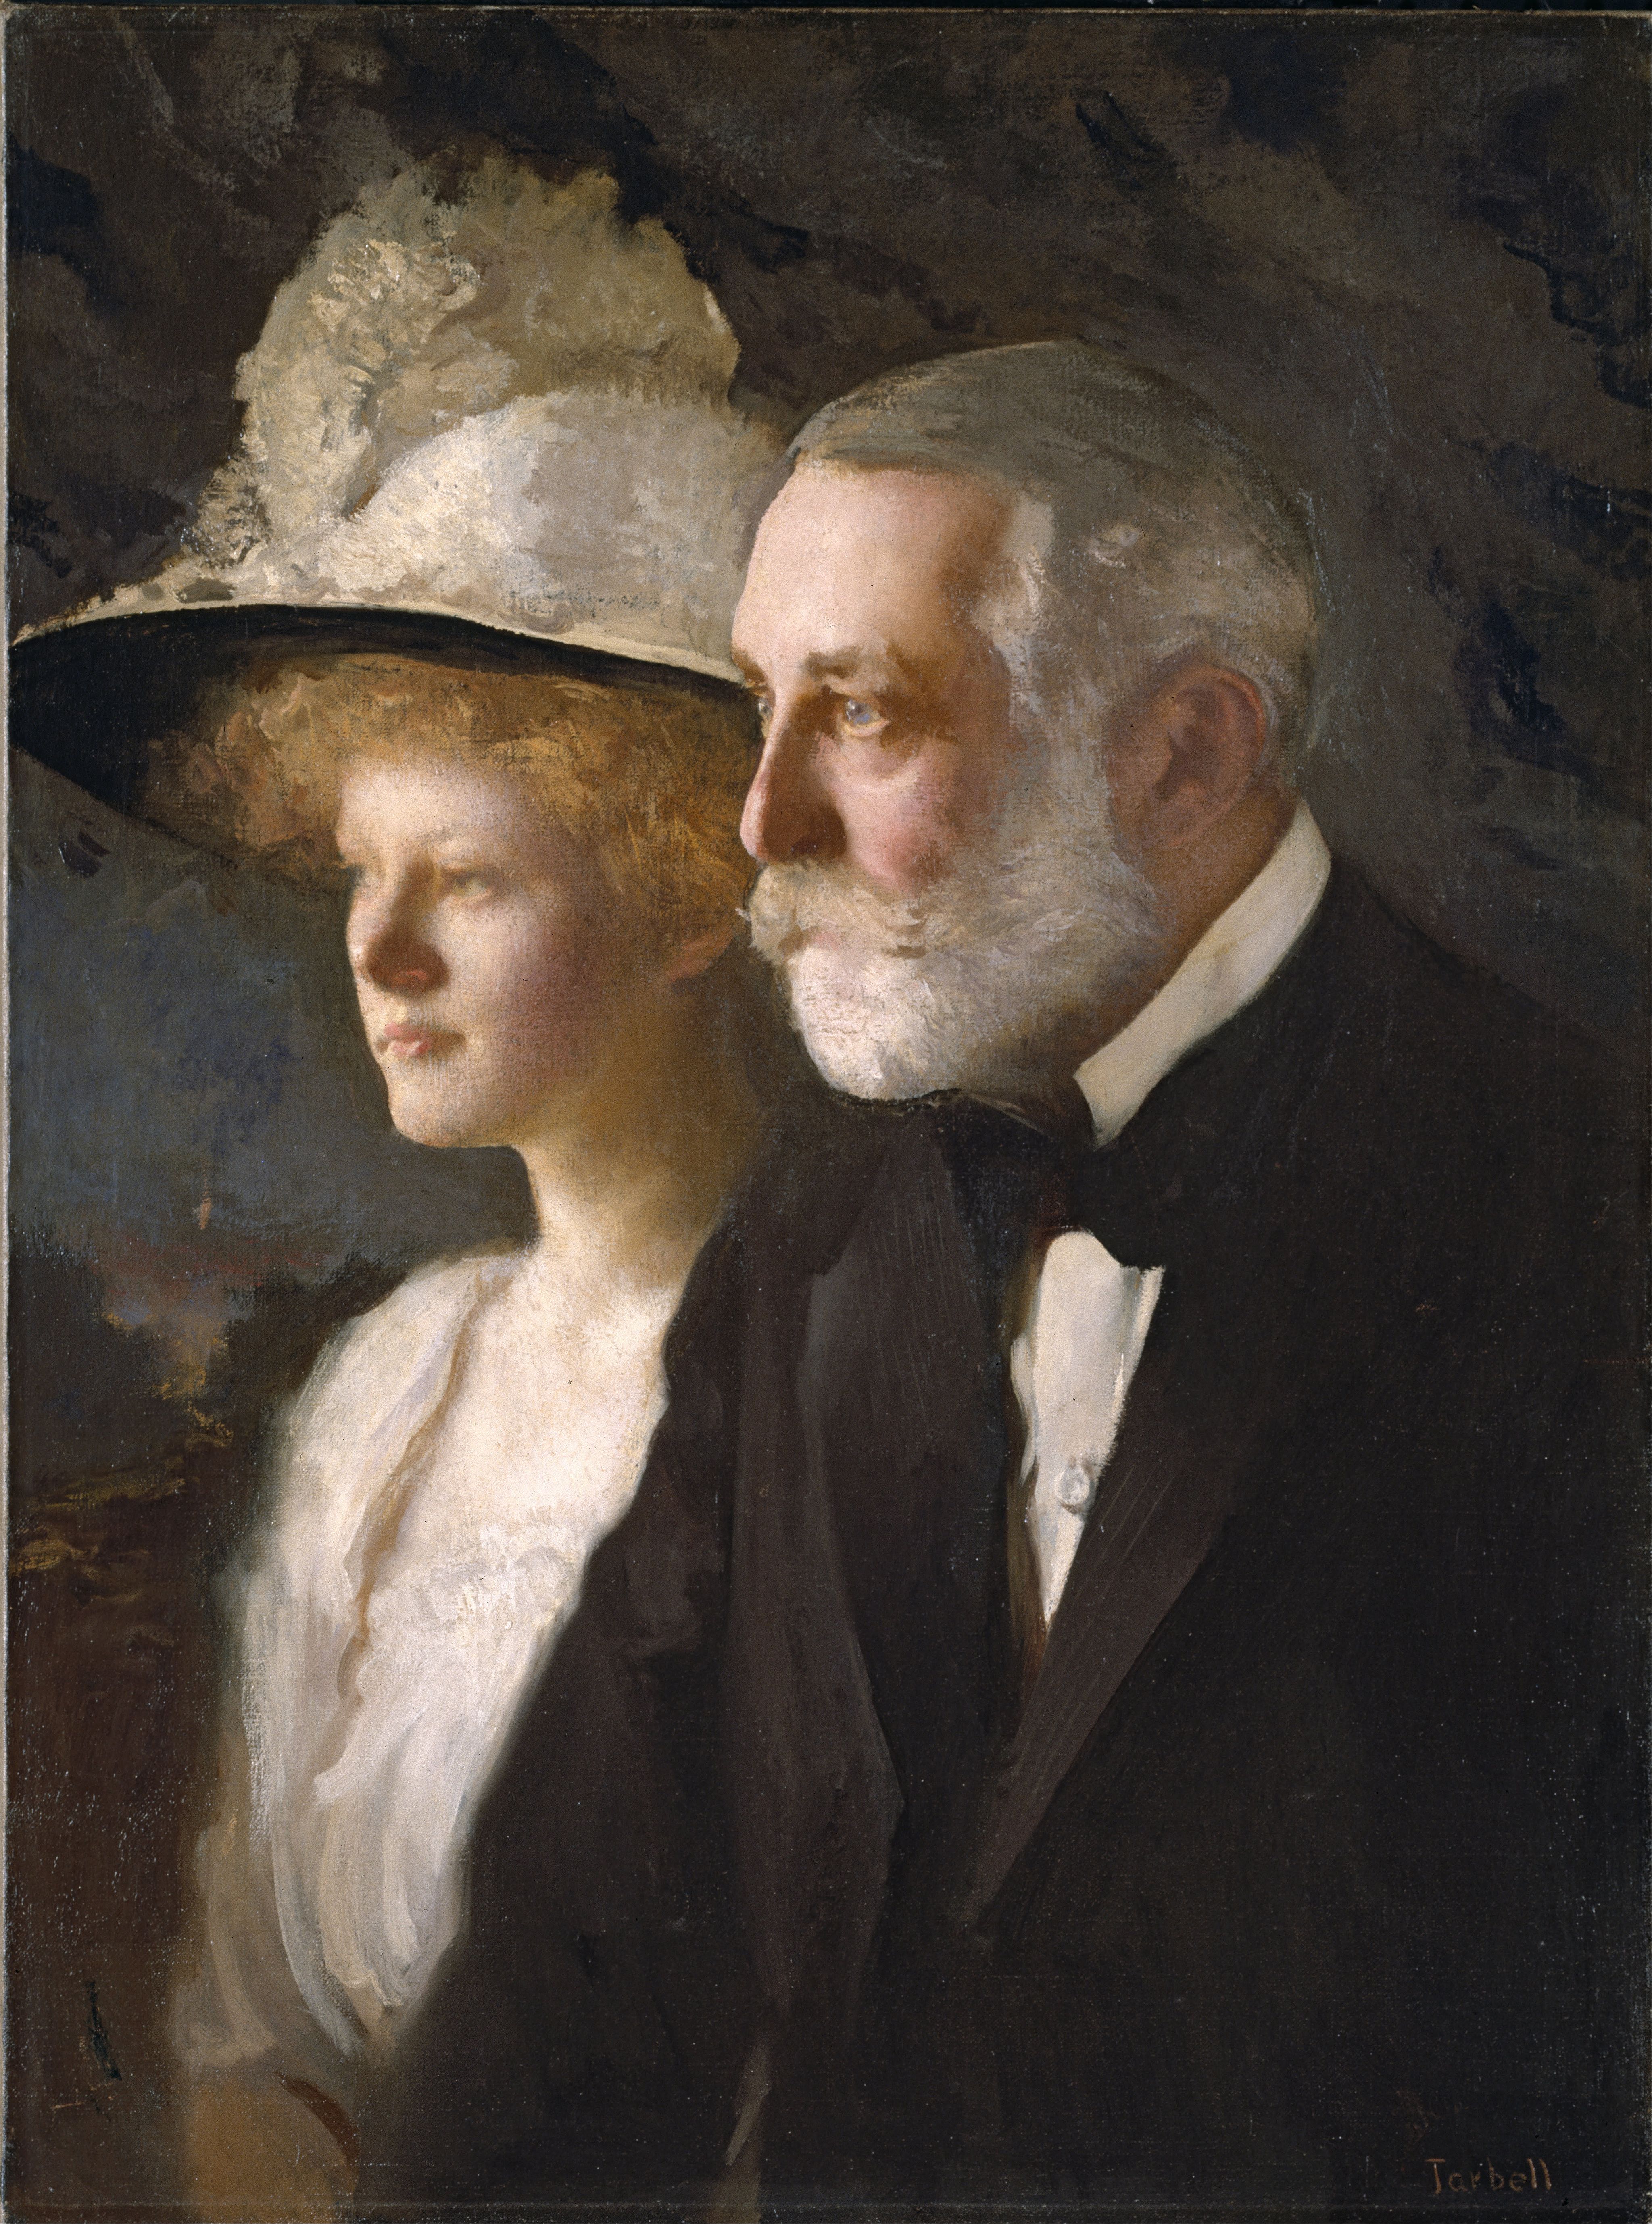 A formidable pair: Helen and Henry Clay Frick circa 1910. The painting, by Edmund C. Tarbell, is in the National Portrait Gallery in Washington, D.C.